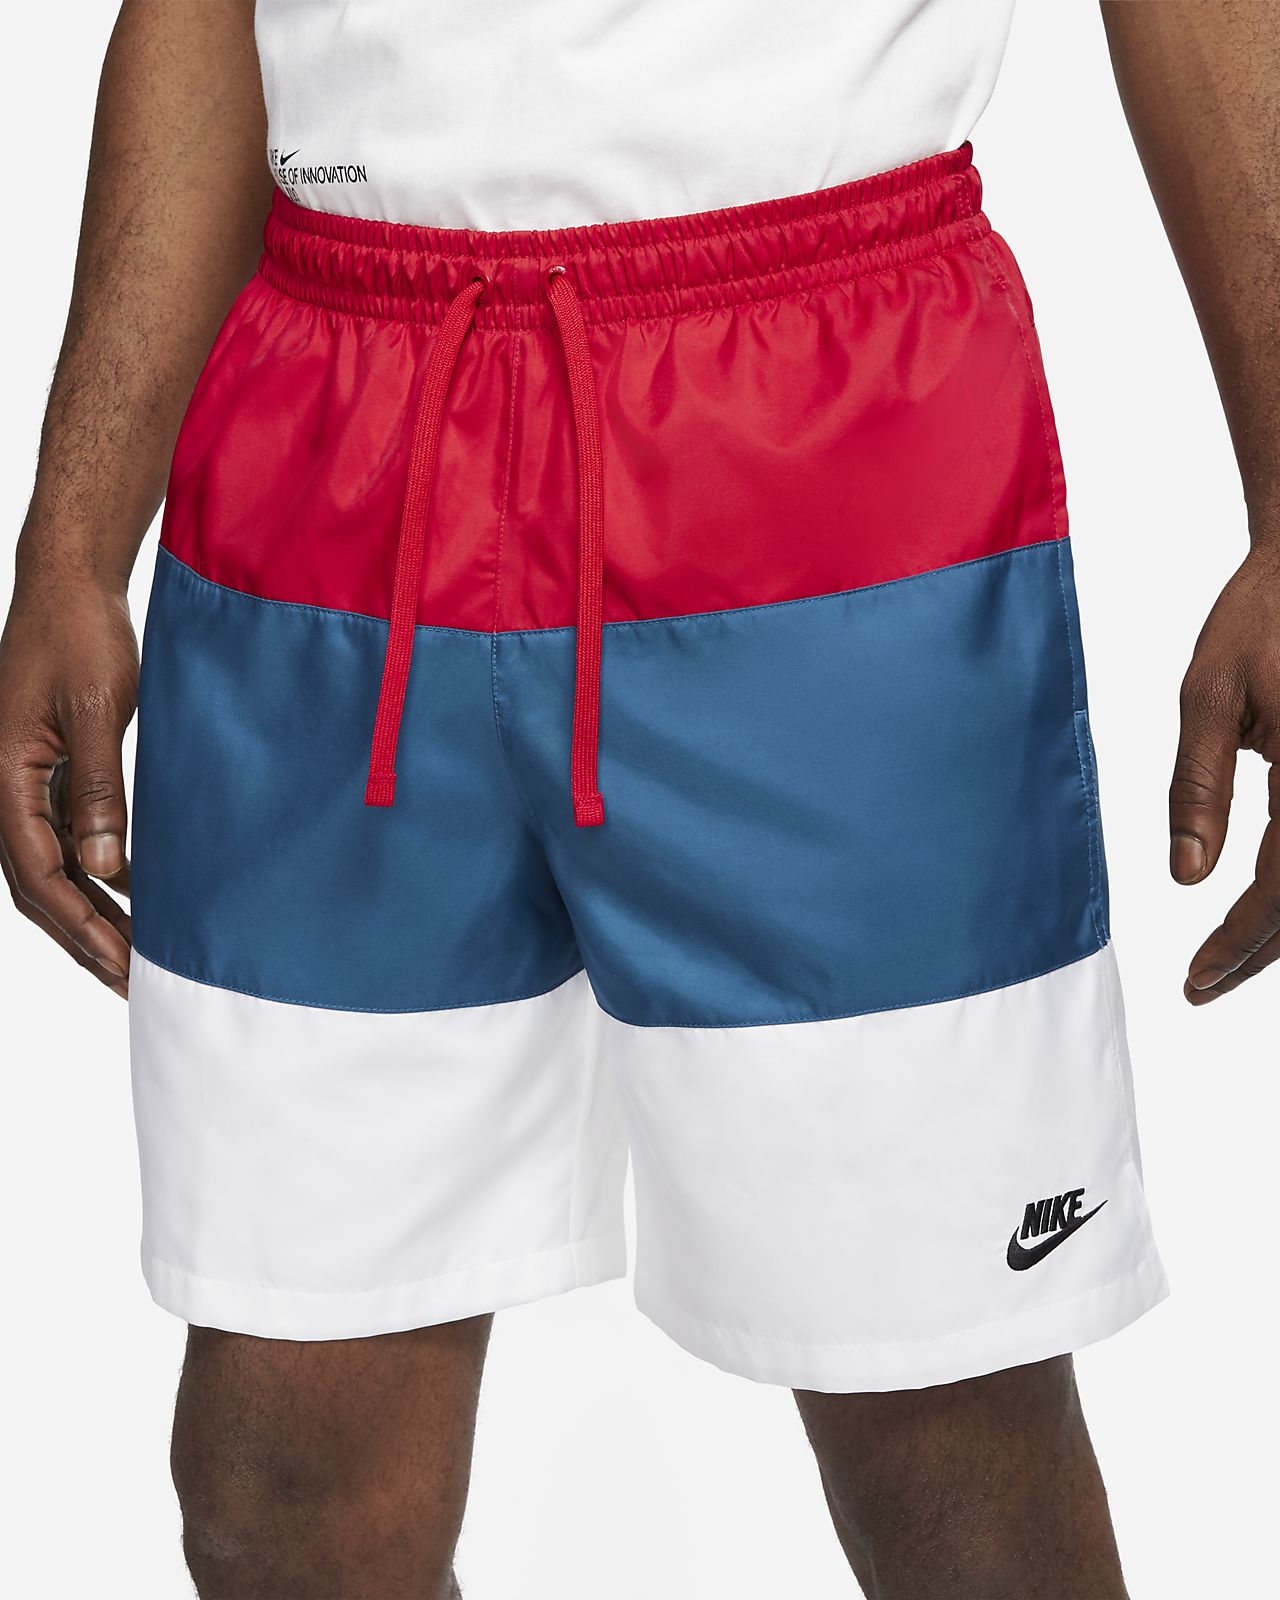 nike city edition shorts cheap online